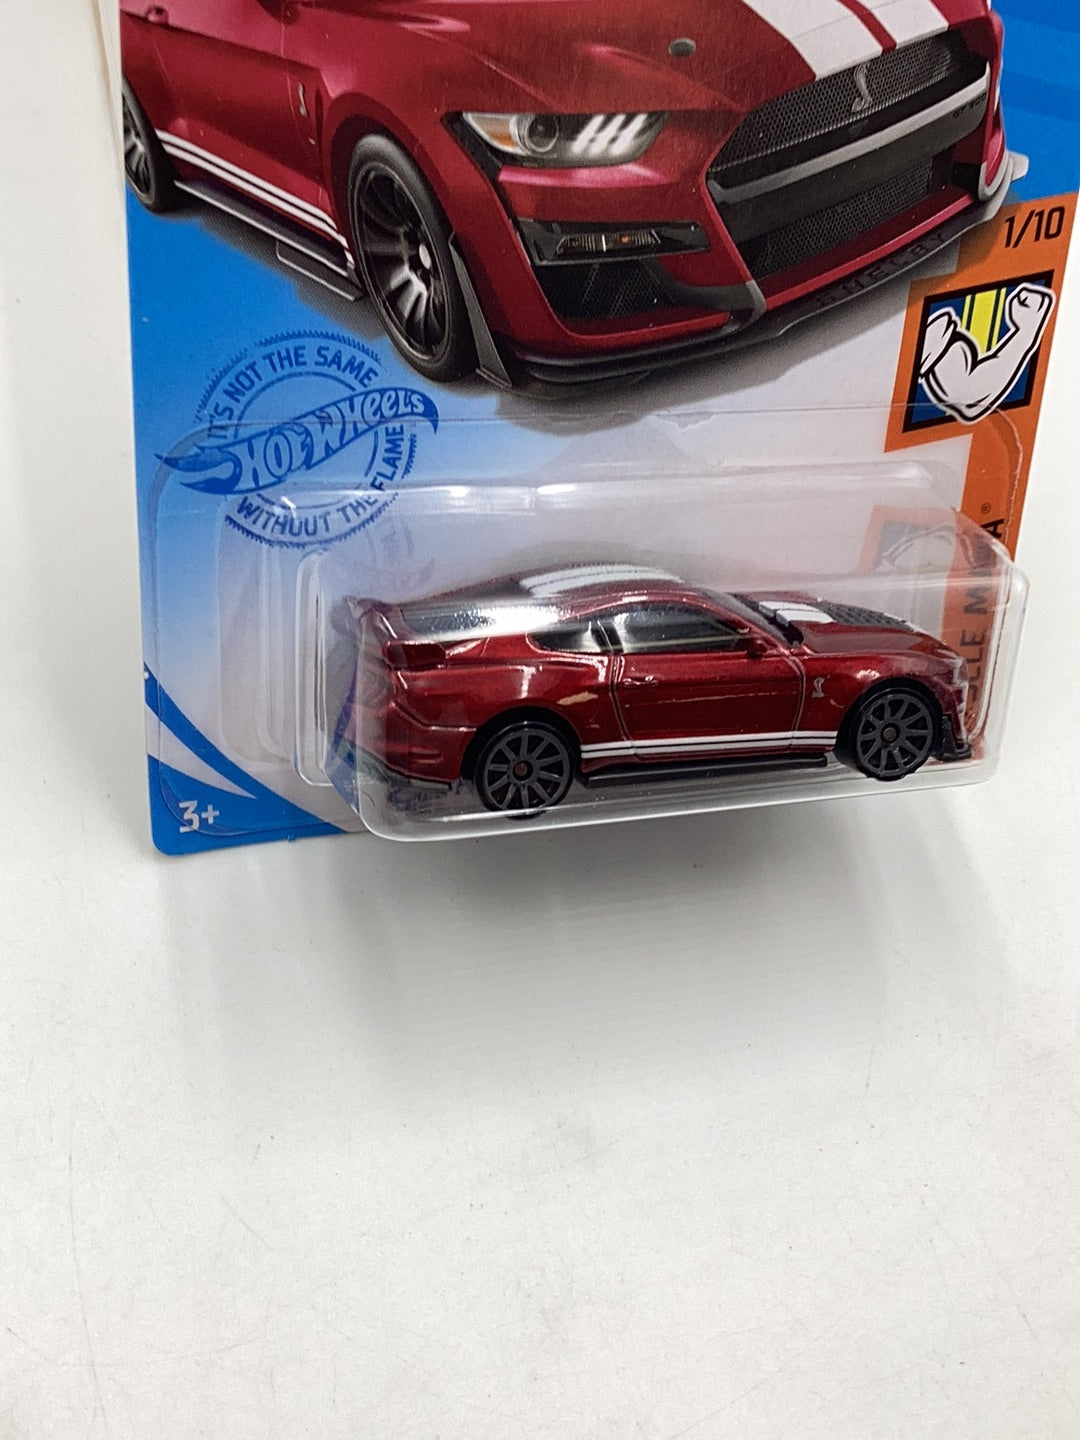 2020 hot wheels #248 2020 Ford mustang Shelby GT500 red GameStop exclusive 160A